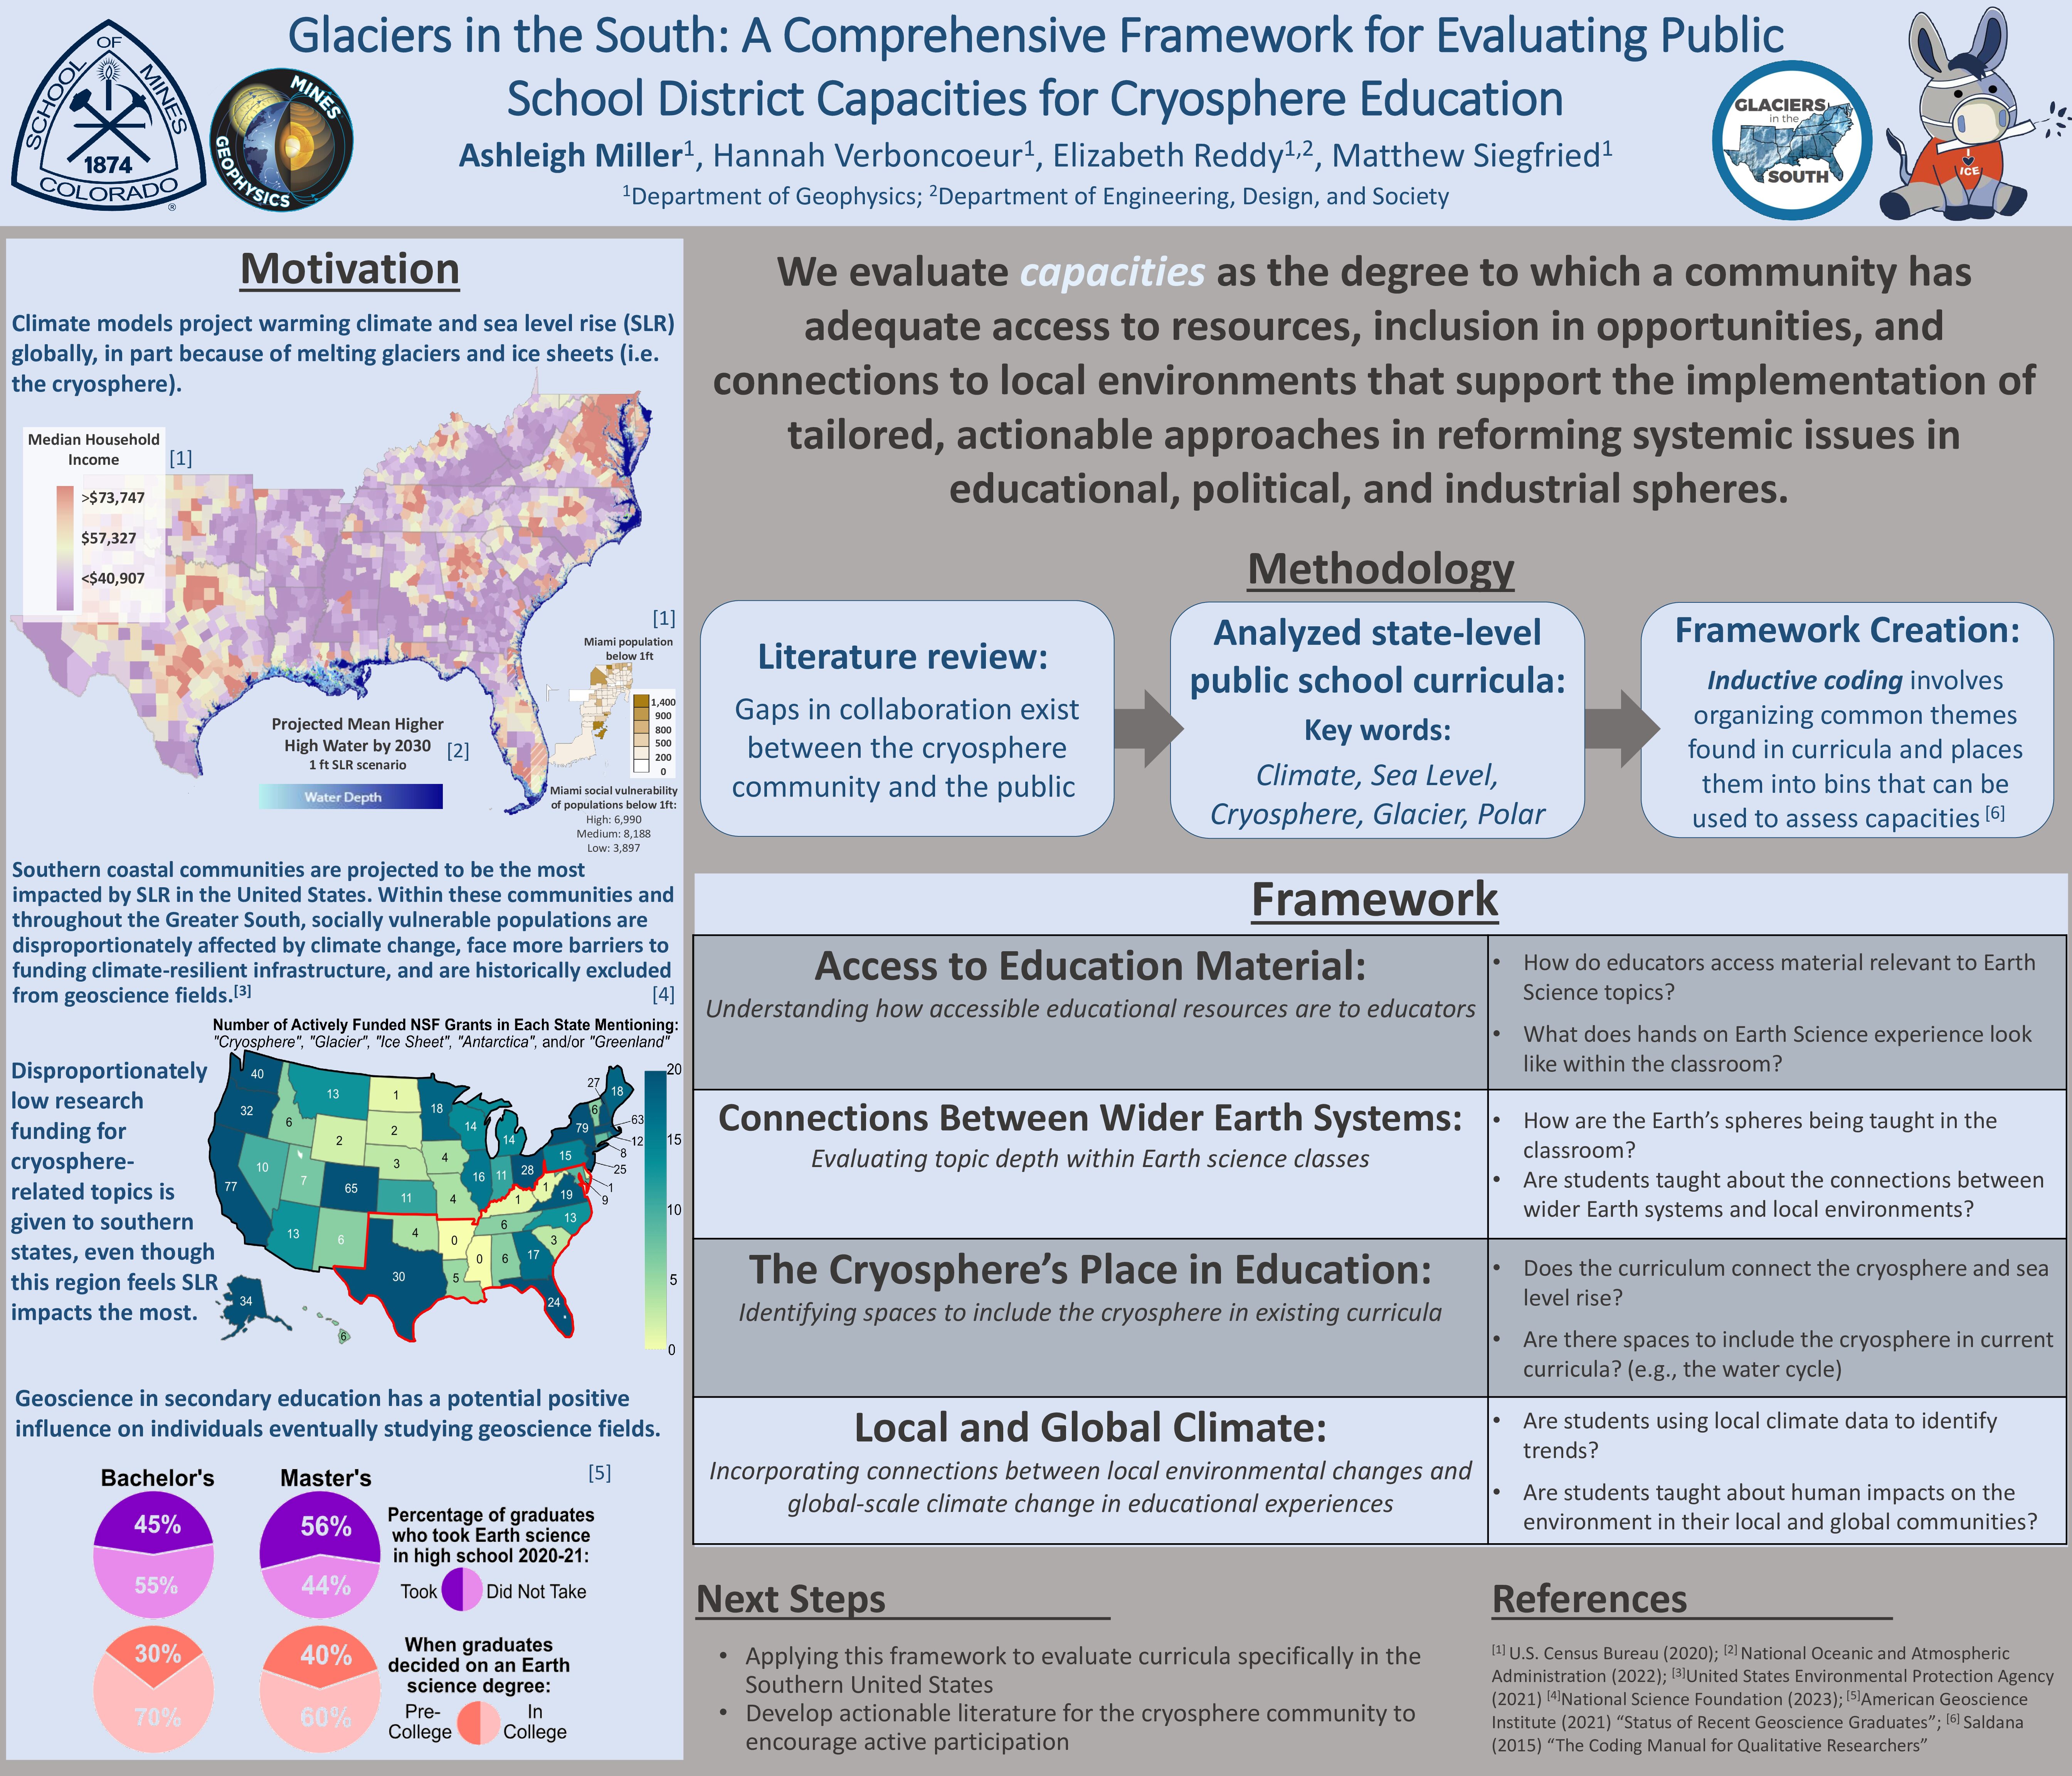 P93 Glaciers in the South: A Comprehensive Framework for Evaluating Public School District Capacities for Cryosphere Education